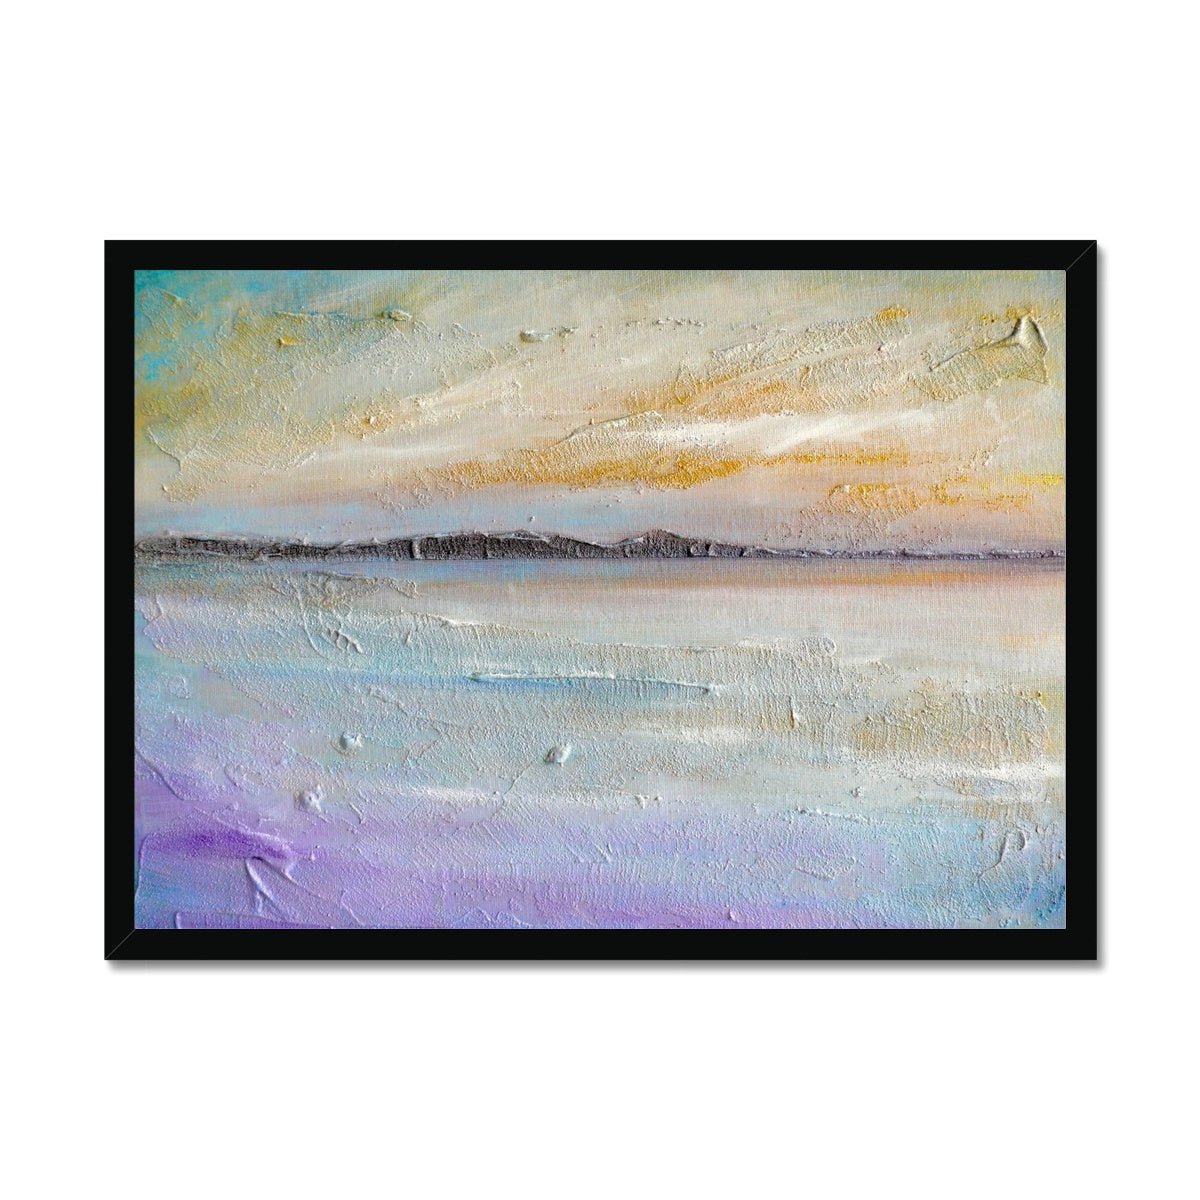 Sollas Beach North Uist Painting | Framed Prints From Scotland-Framed Prints-Hebridean Islands Art Gallery-A2 Landscape-Black Frame-Paintings, Prints, Homeware, Art Gifts From Scotland By Scottish Artist Kevin Hunter